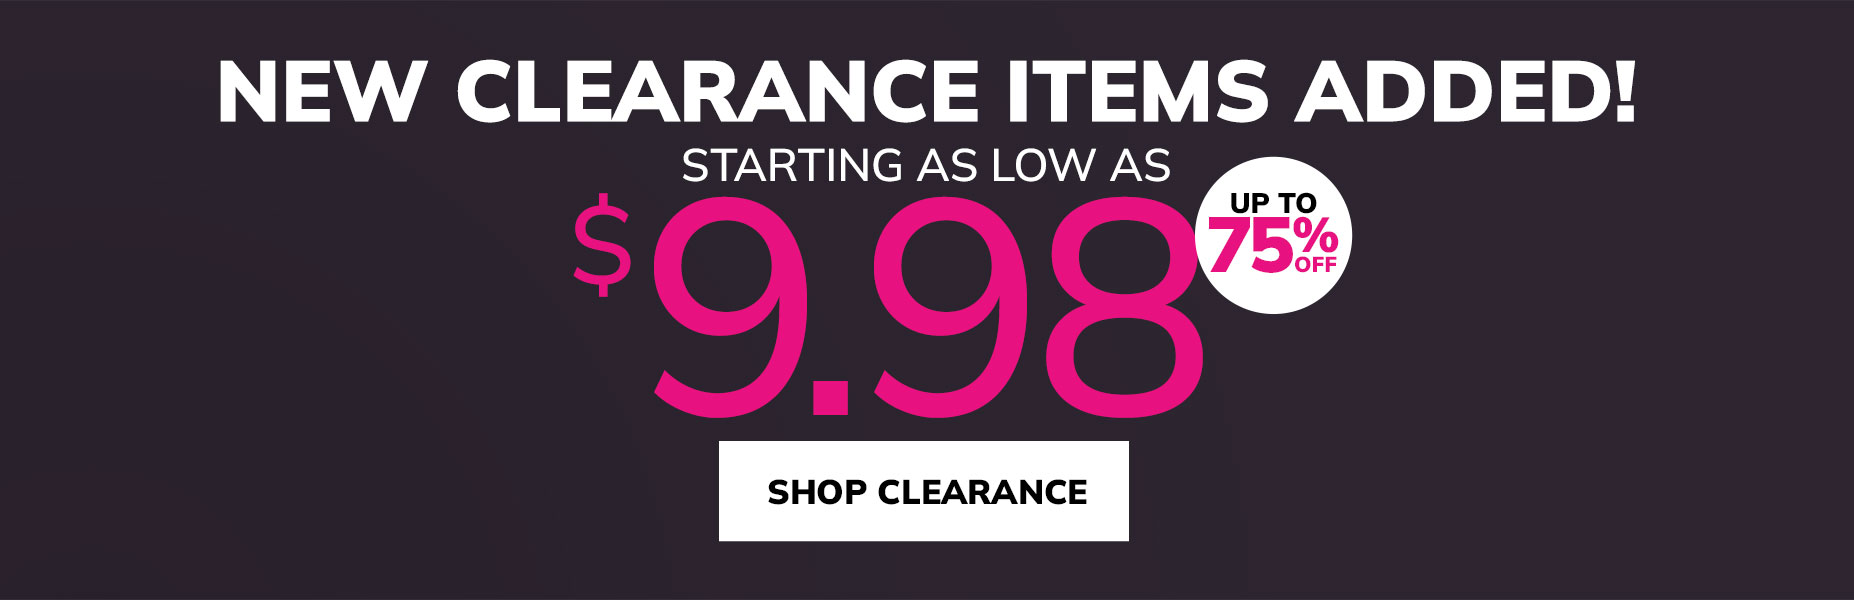 new clearance items added - upto 75% off